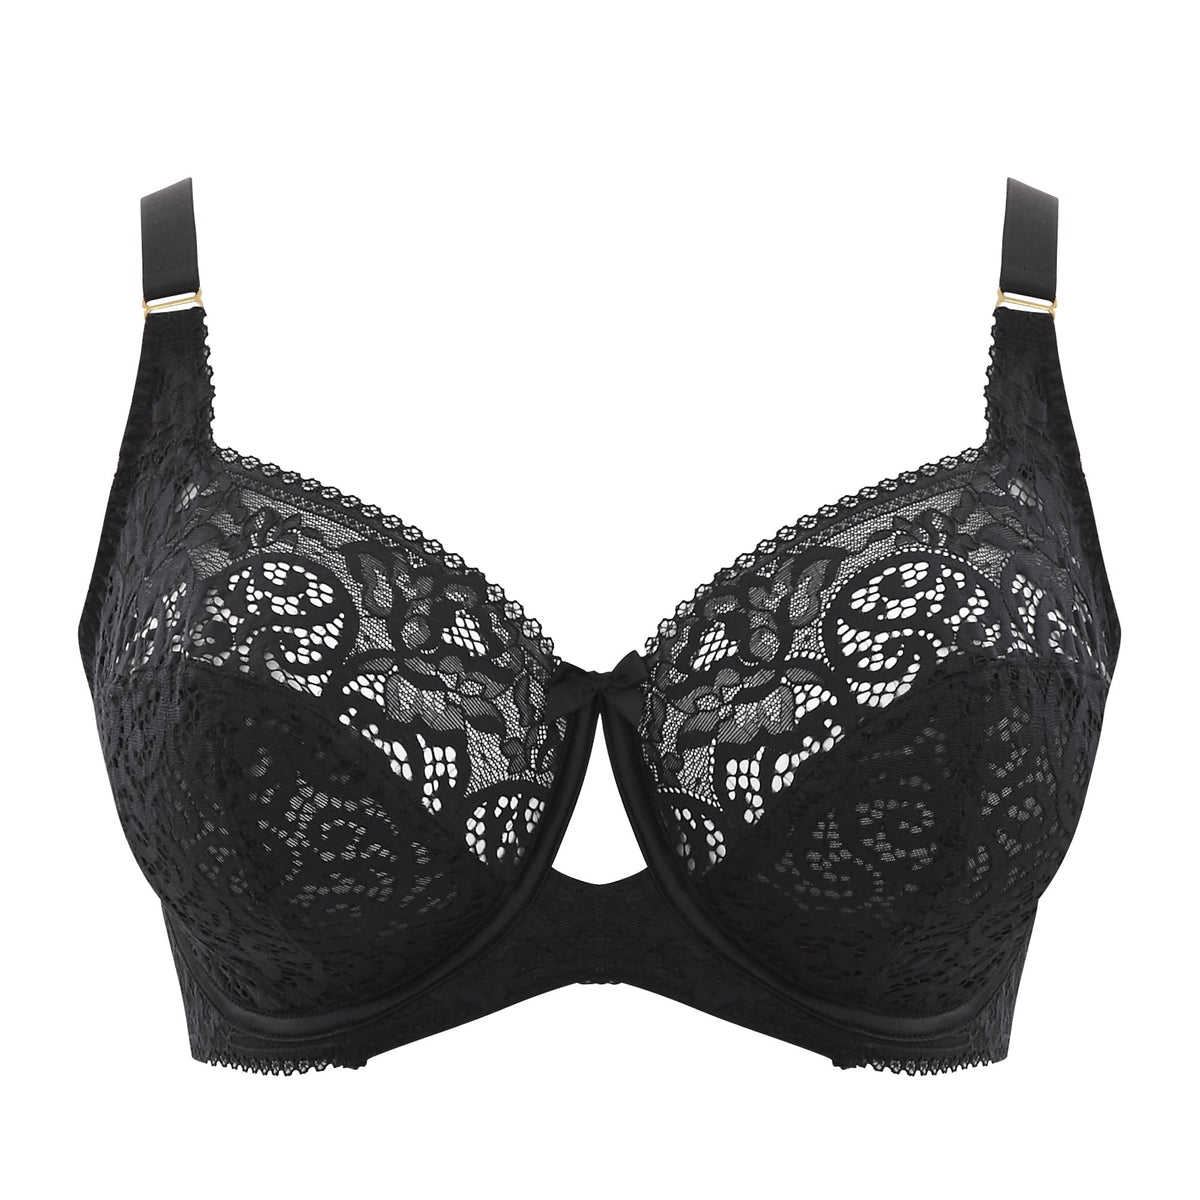 Buy Black Recycled Lace Full Cup Bra - 44DD, Bras